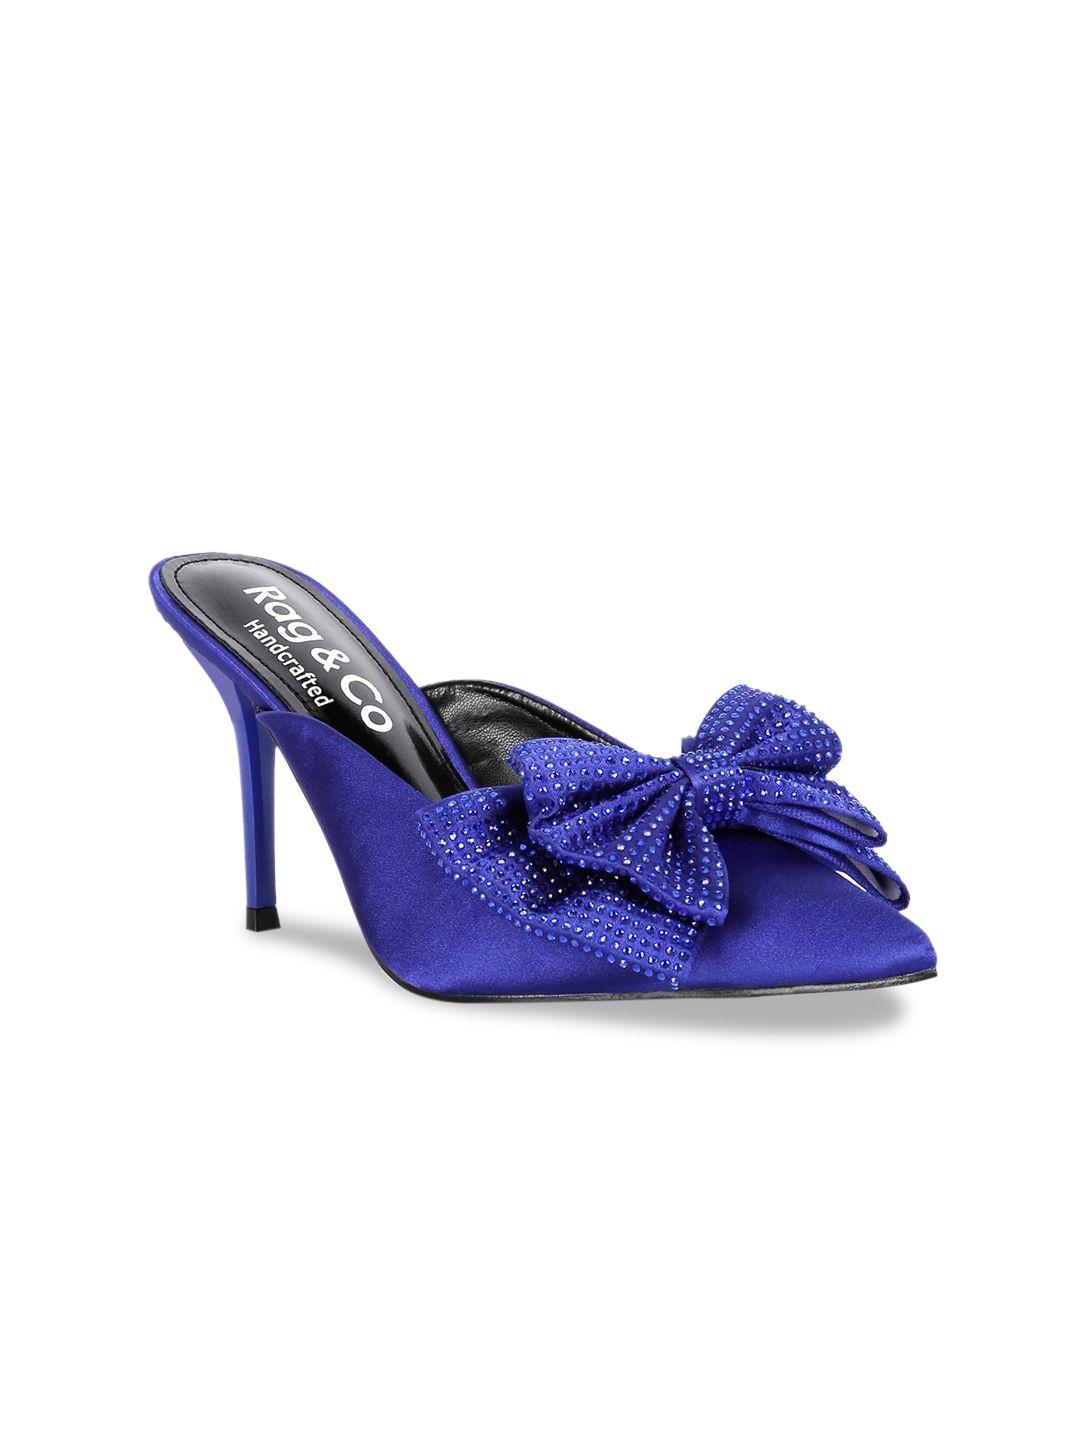 rag & co women navy blue embellished party mules with bows